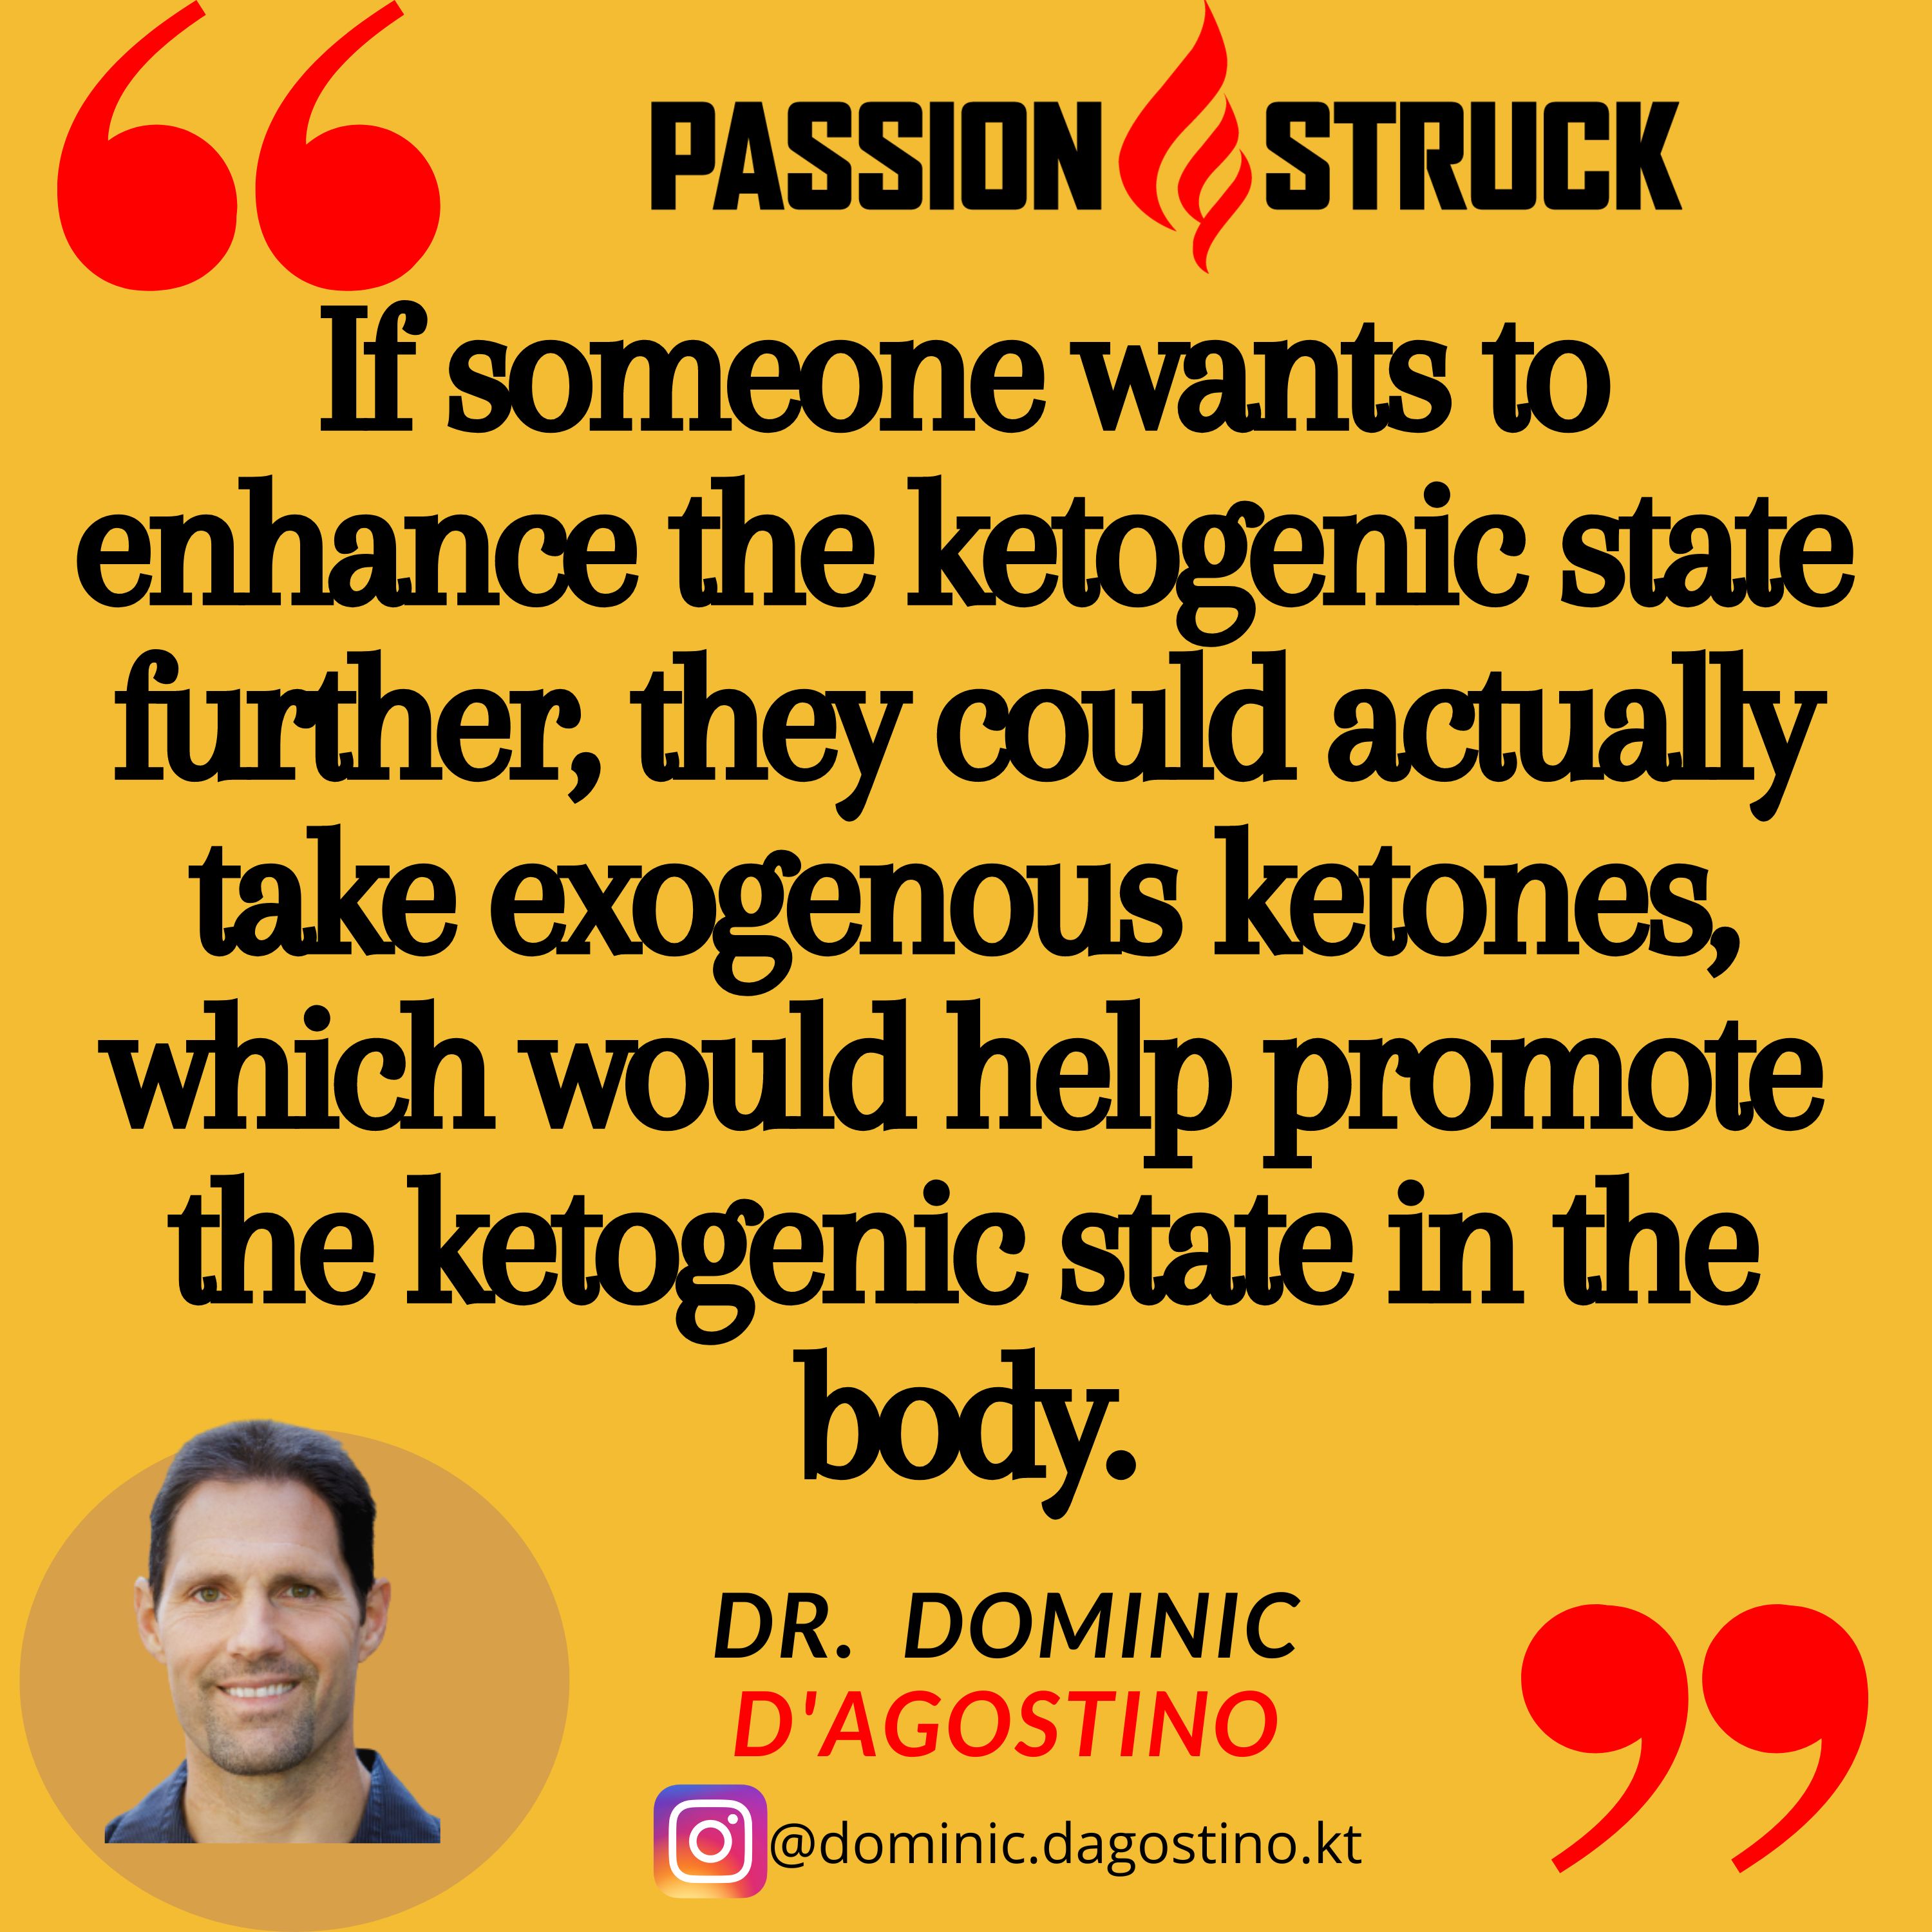 Quote by Dominic D'Agostino for the Passion Struck Podcast: If someone wants to enhance the ketogenic state further, they could actually take exogenous ketones, which would help promote the ketogenic state in the body.